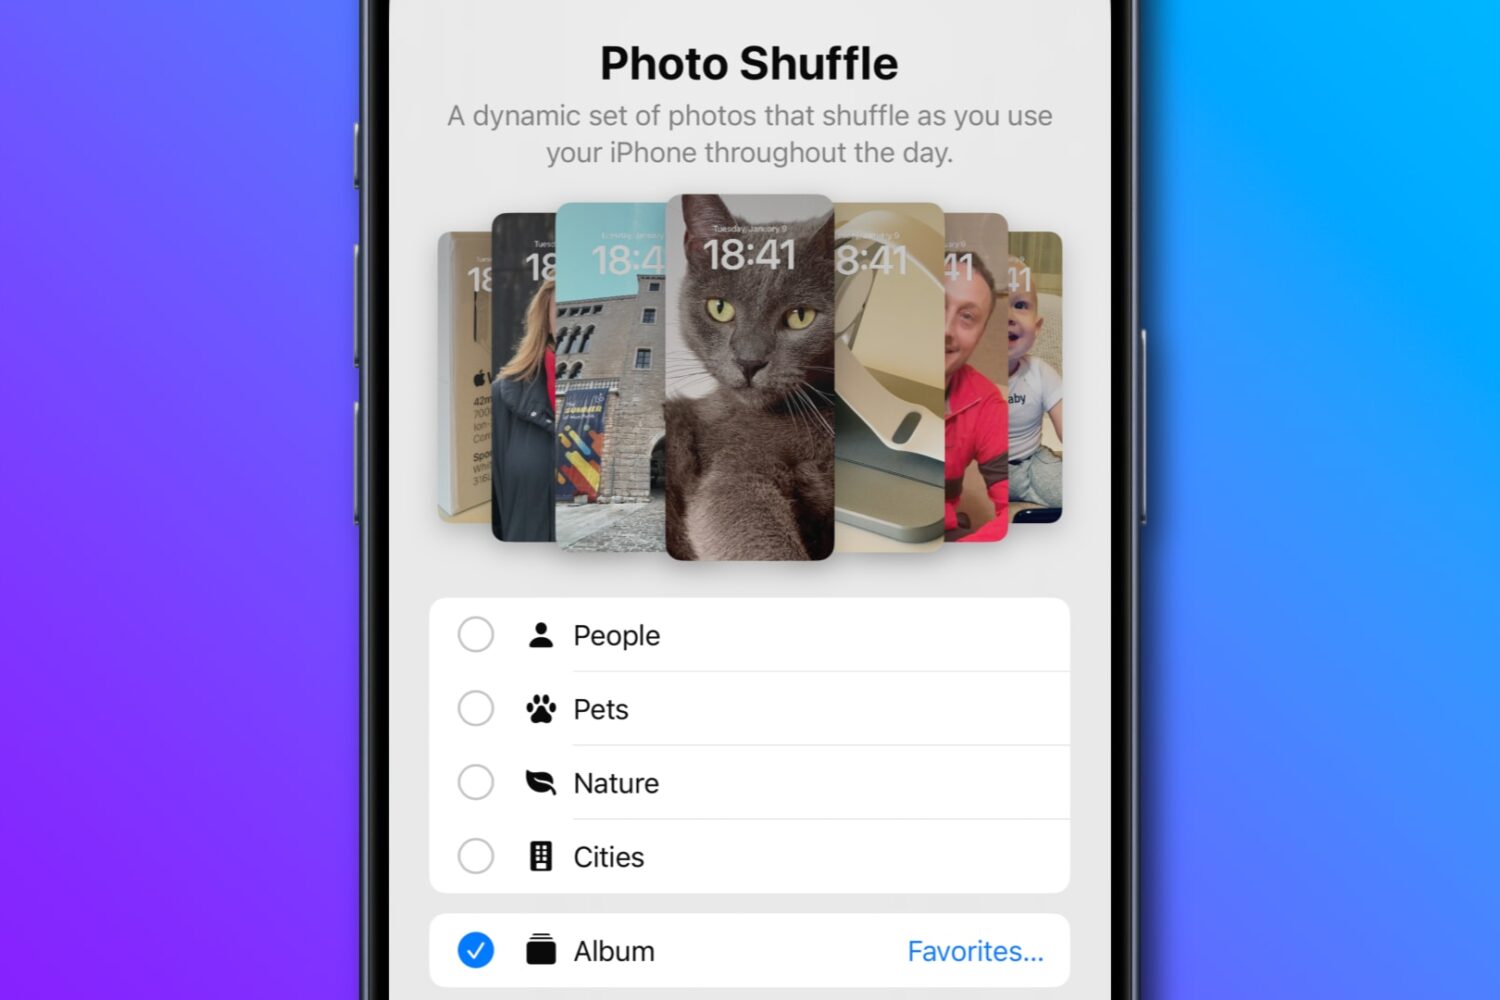 Setting the iPhone's Photo Shuffle feature to the Favorites album